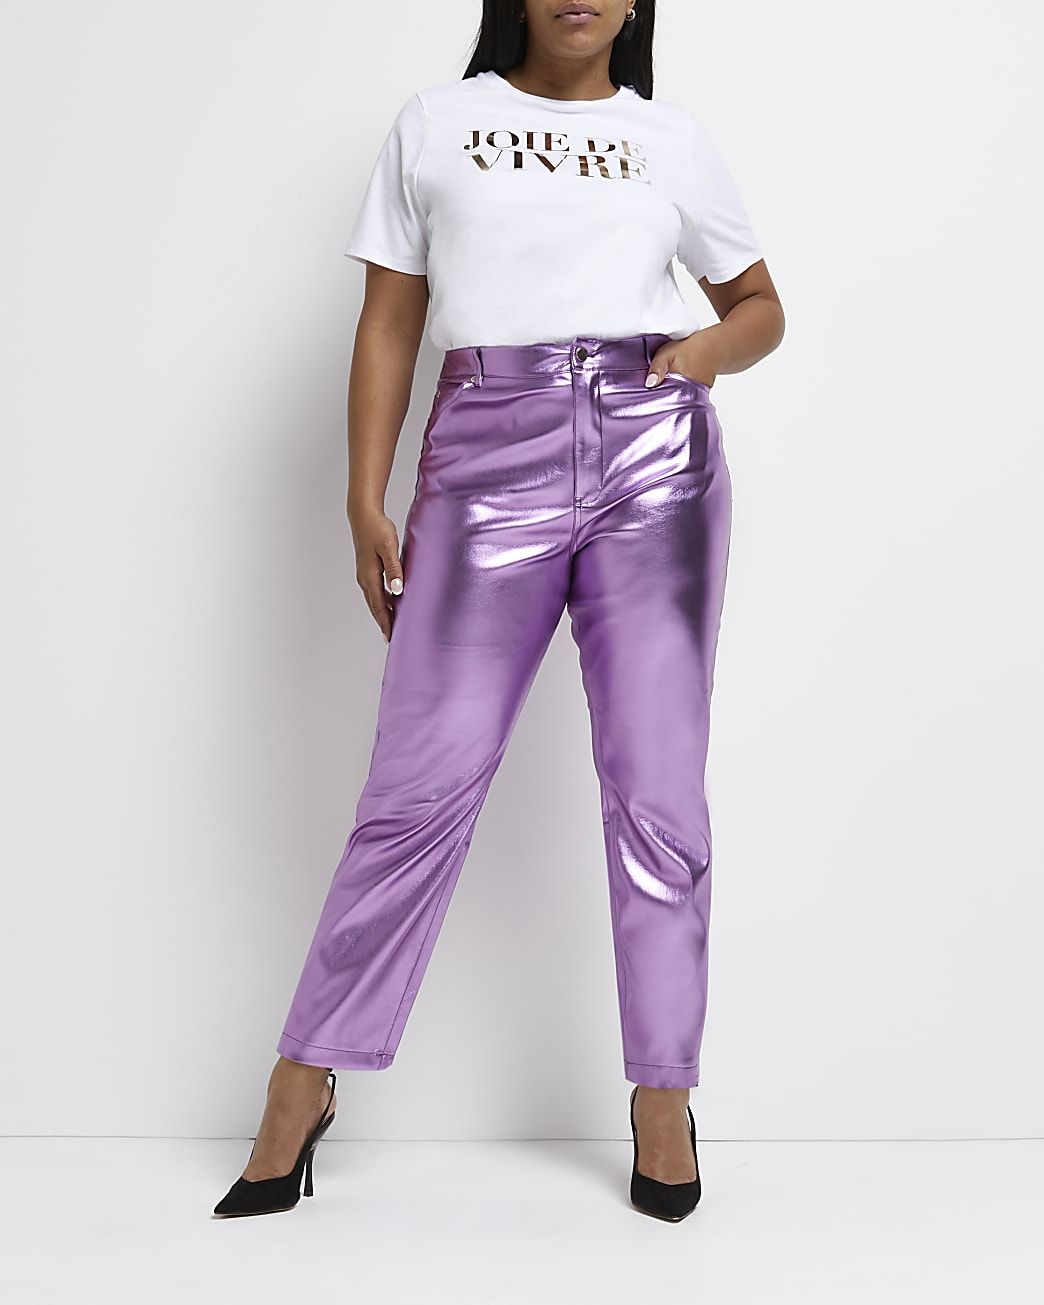 River Island Leather Trousers outlet  1800 products on sale   FASHIOLAcouk